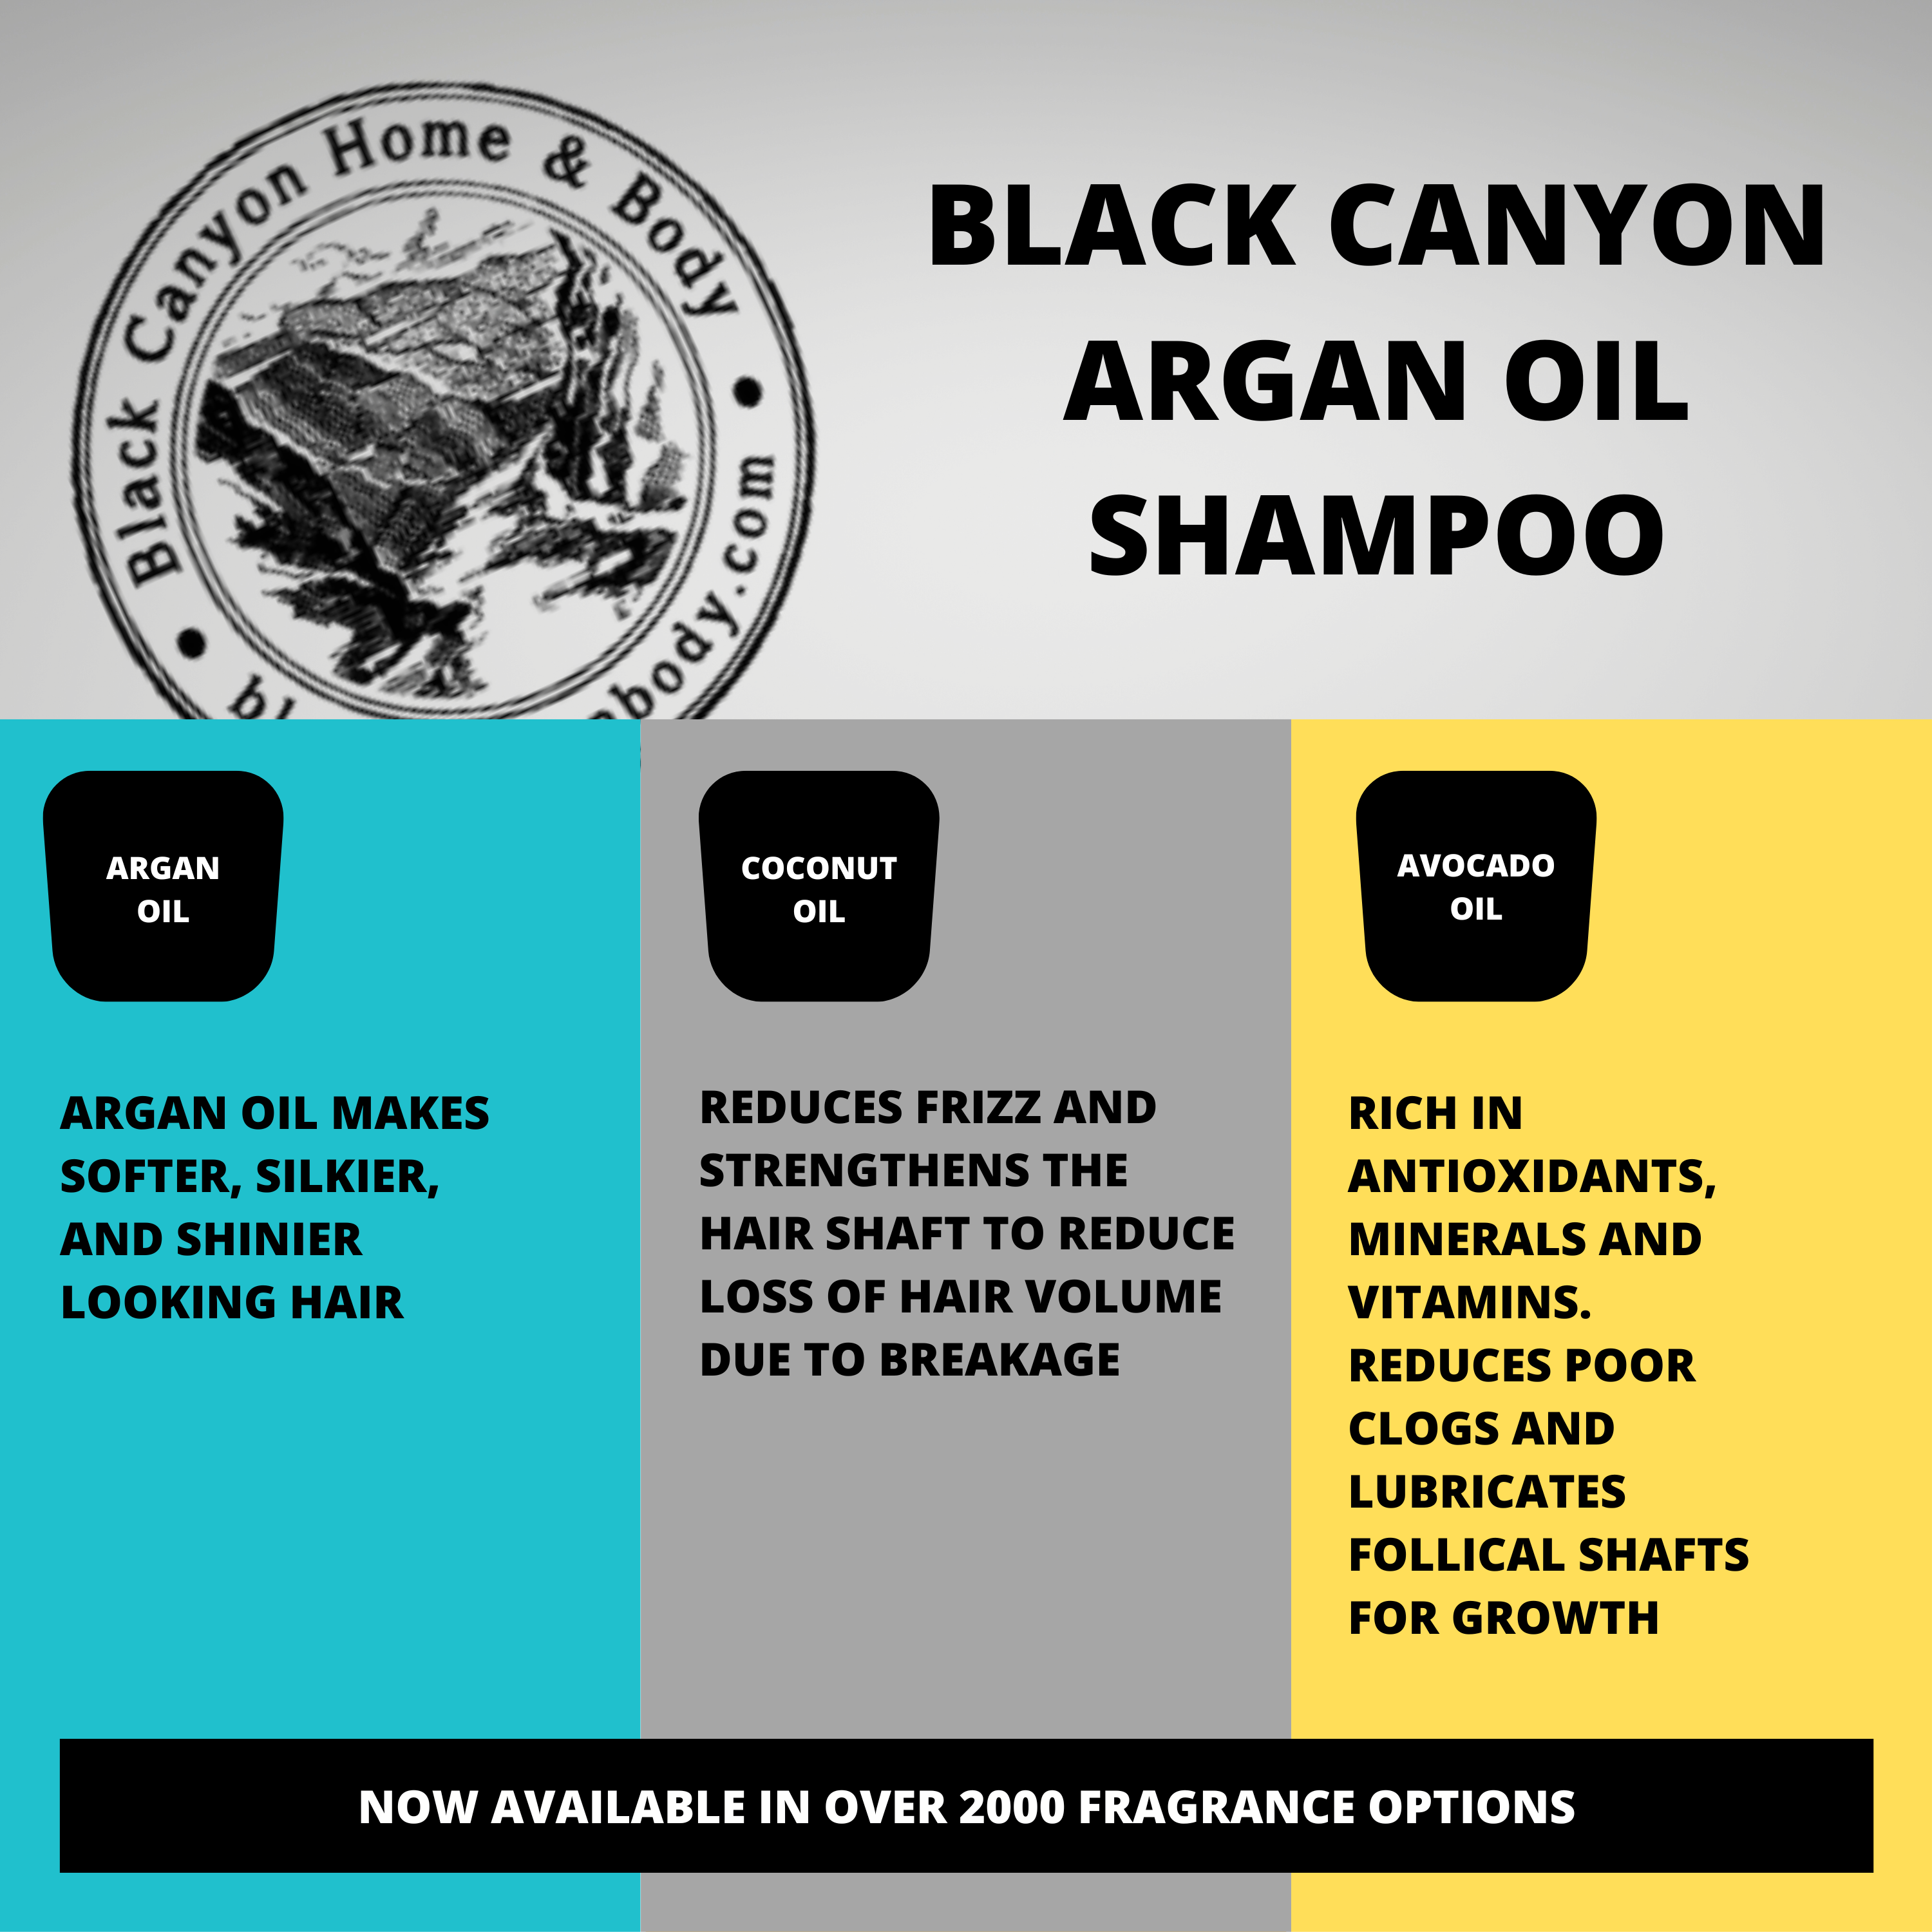 Black Canyon Simply Sinful Scented Shampoo with Argan Oil